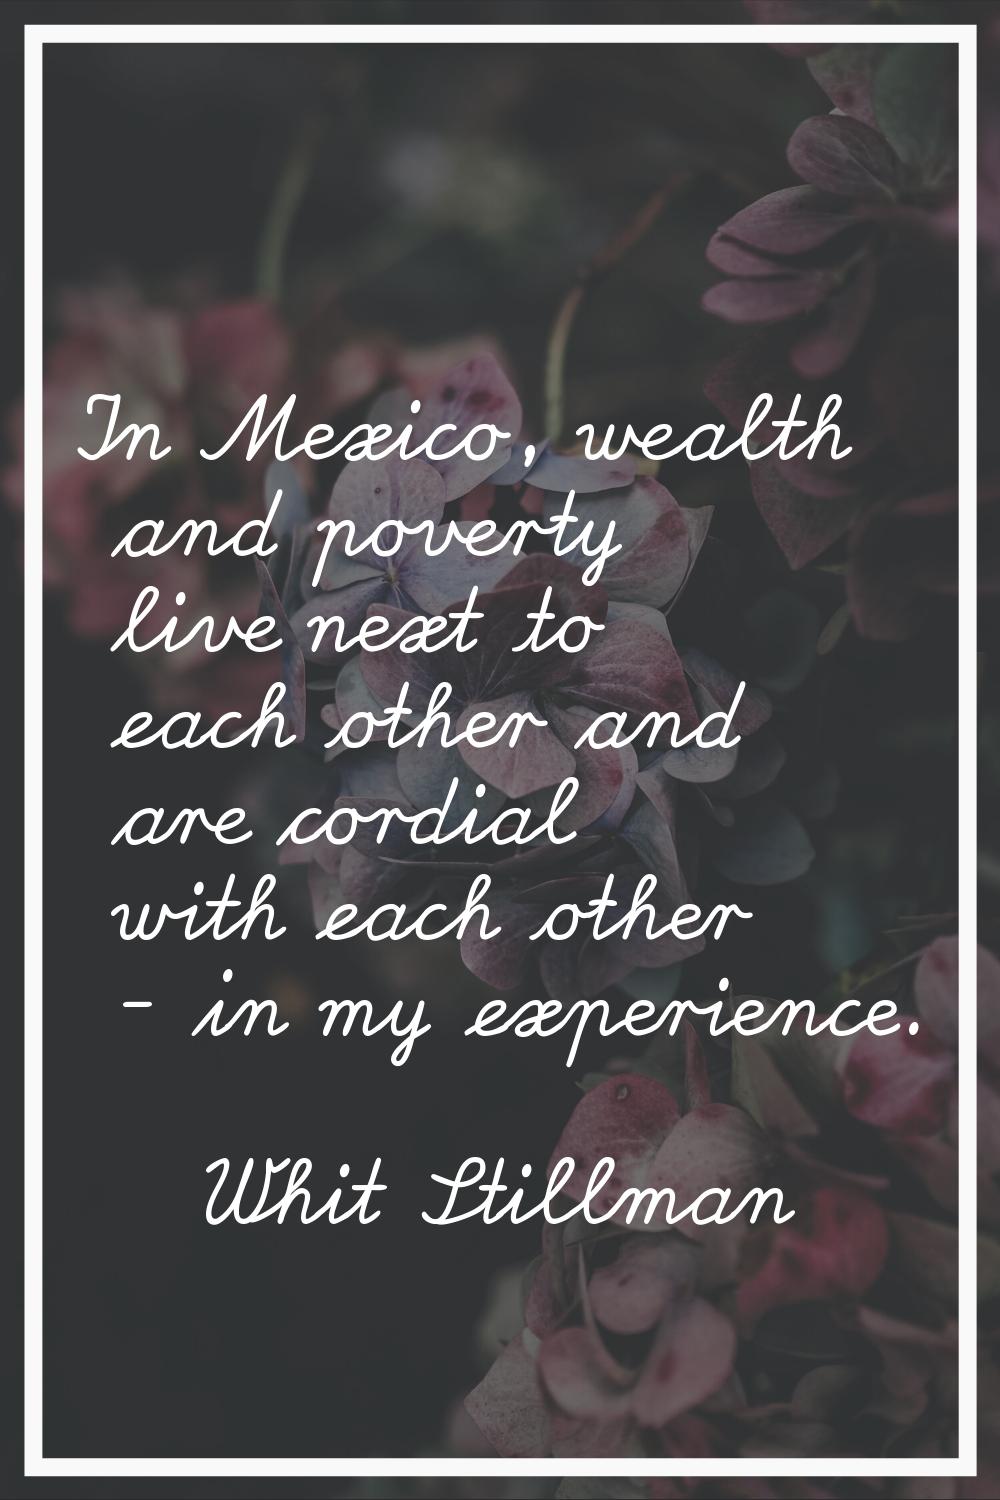 In Mexico, wealth and poverty live next to each other and are cordial with each other - in my exper